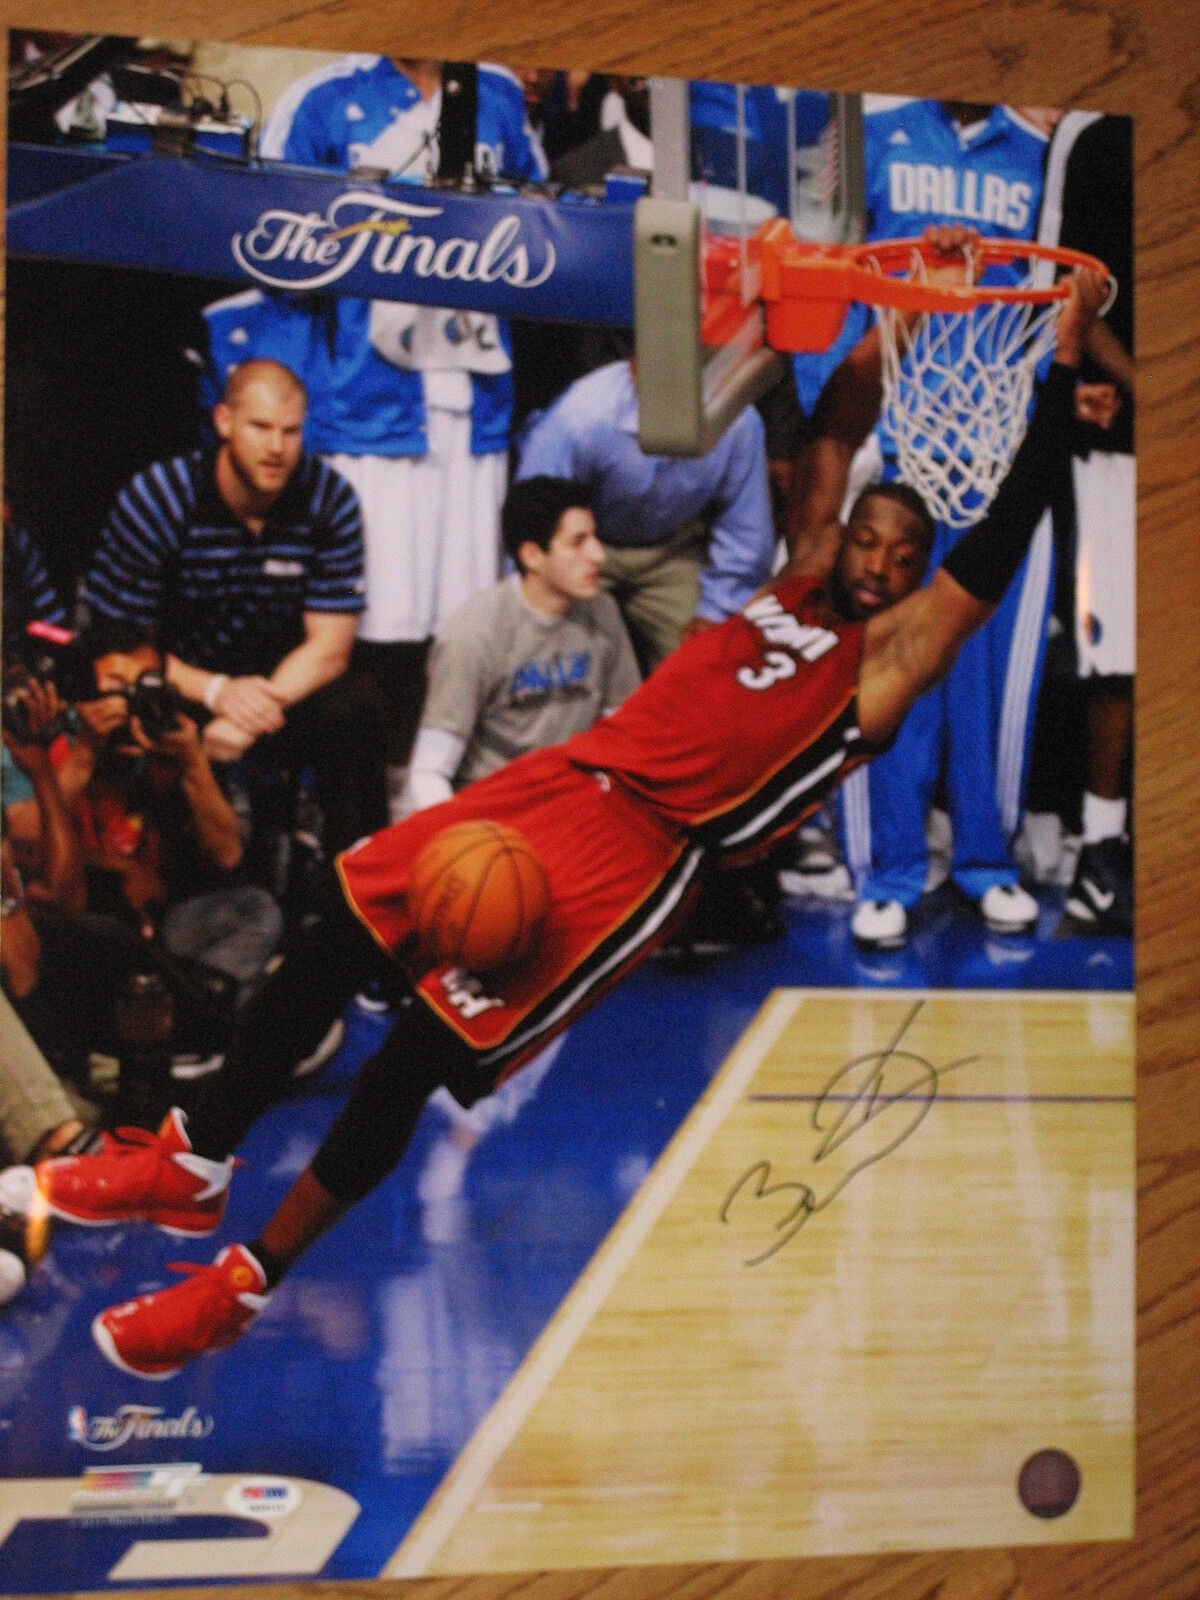 Dwyane Wade Autographed Signed PSA/DNA Photo Authentic  Miami Heat #4